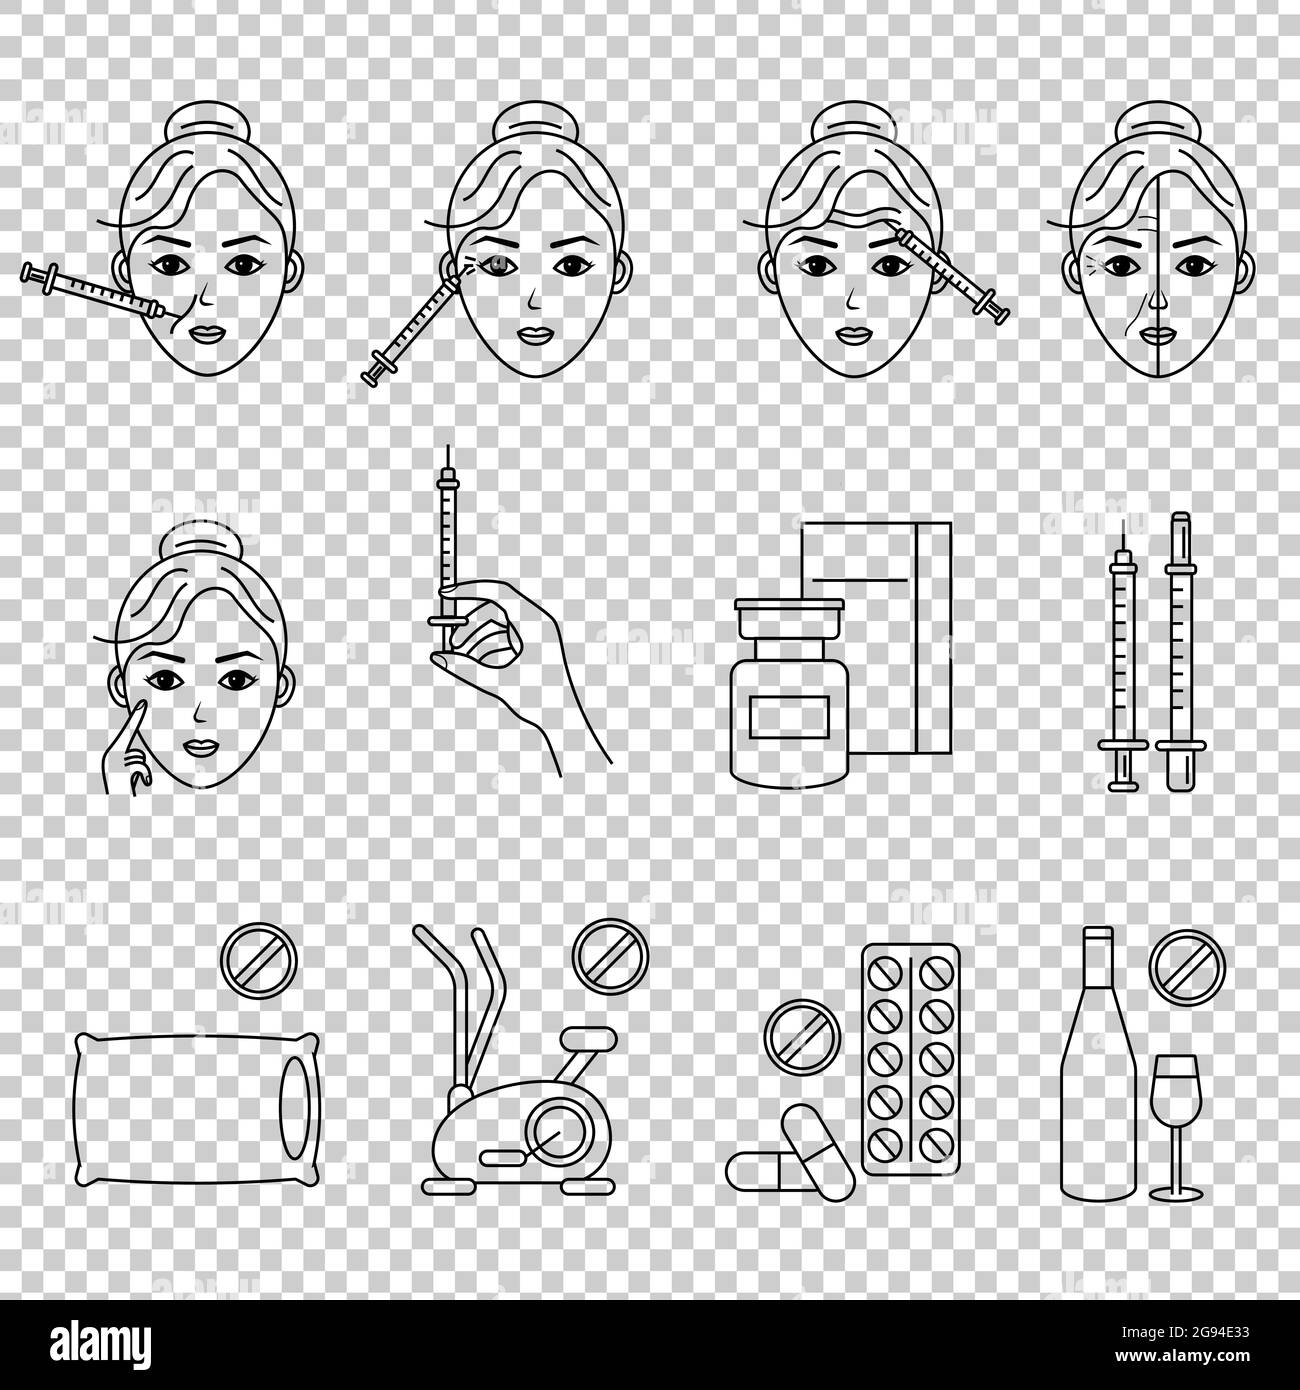 Beauty injection line icon. Woman, face, medical syringe, botox. Beauty care concept. Can be used for topics like rejuvenation, aesthetics, cosmetolog Stock Vector